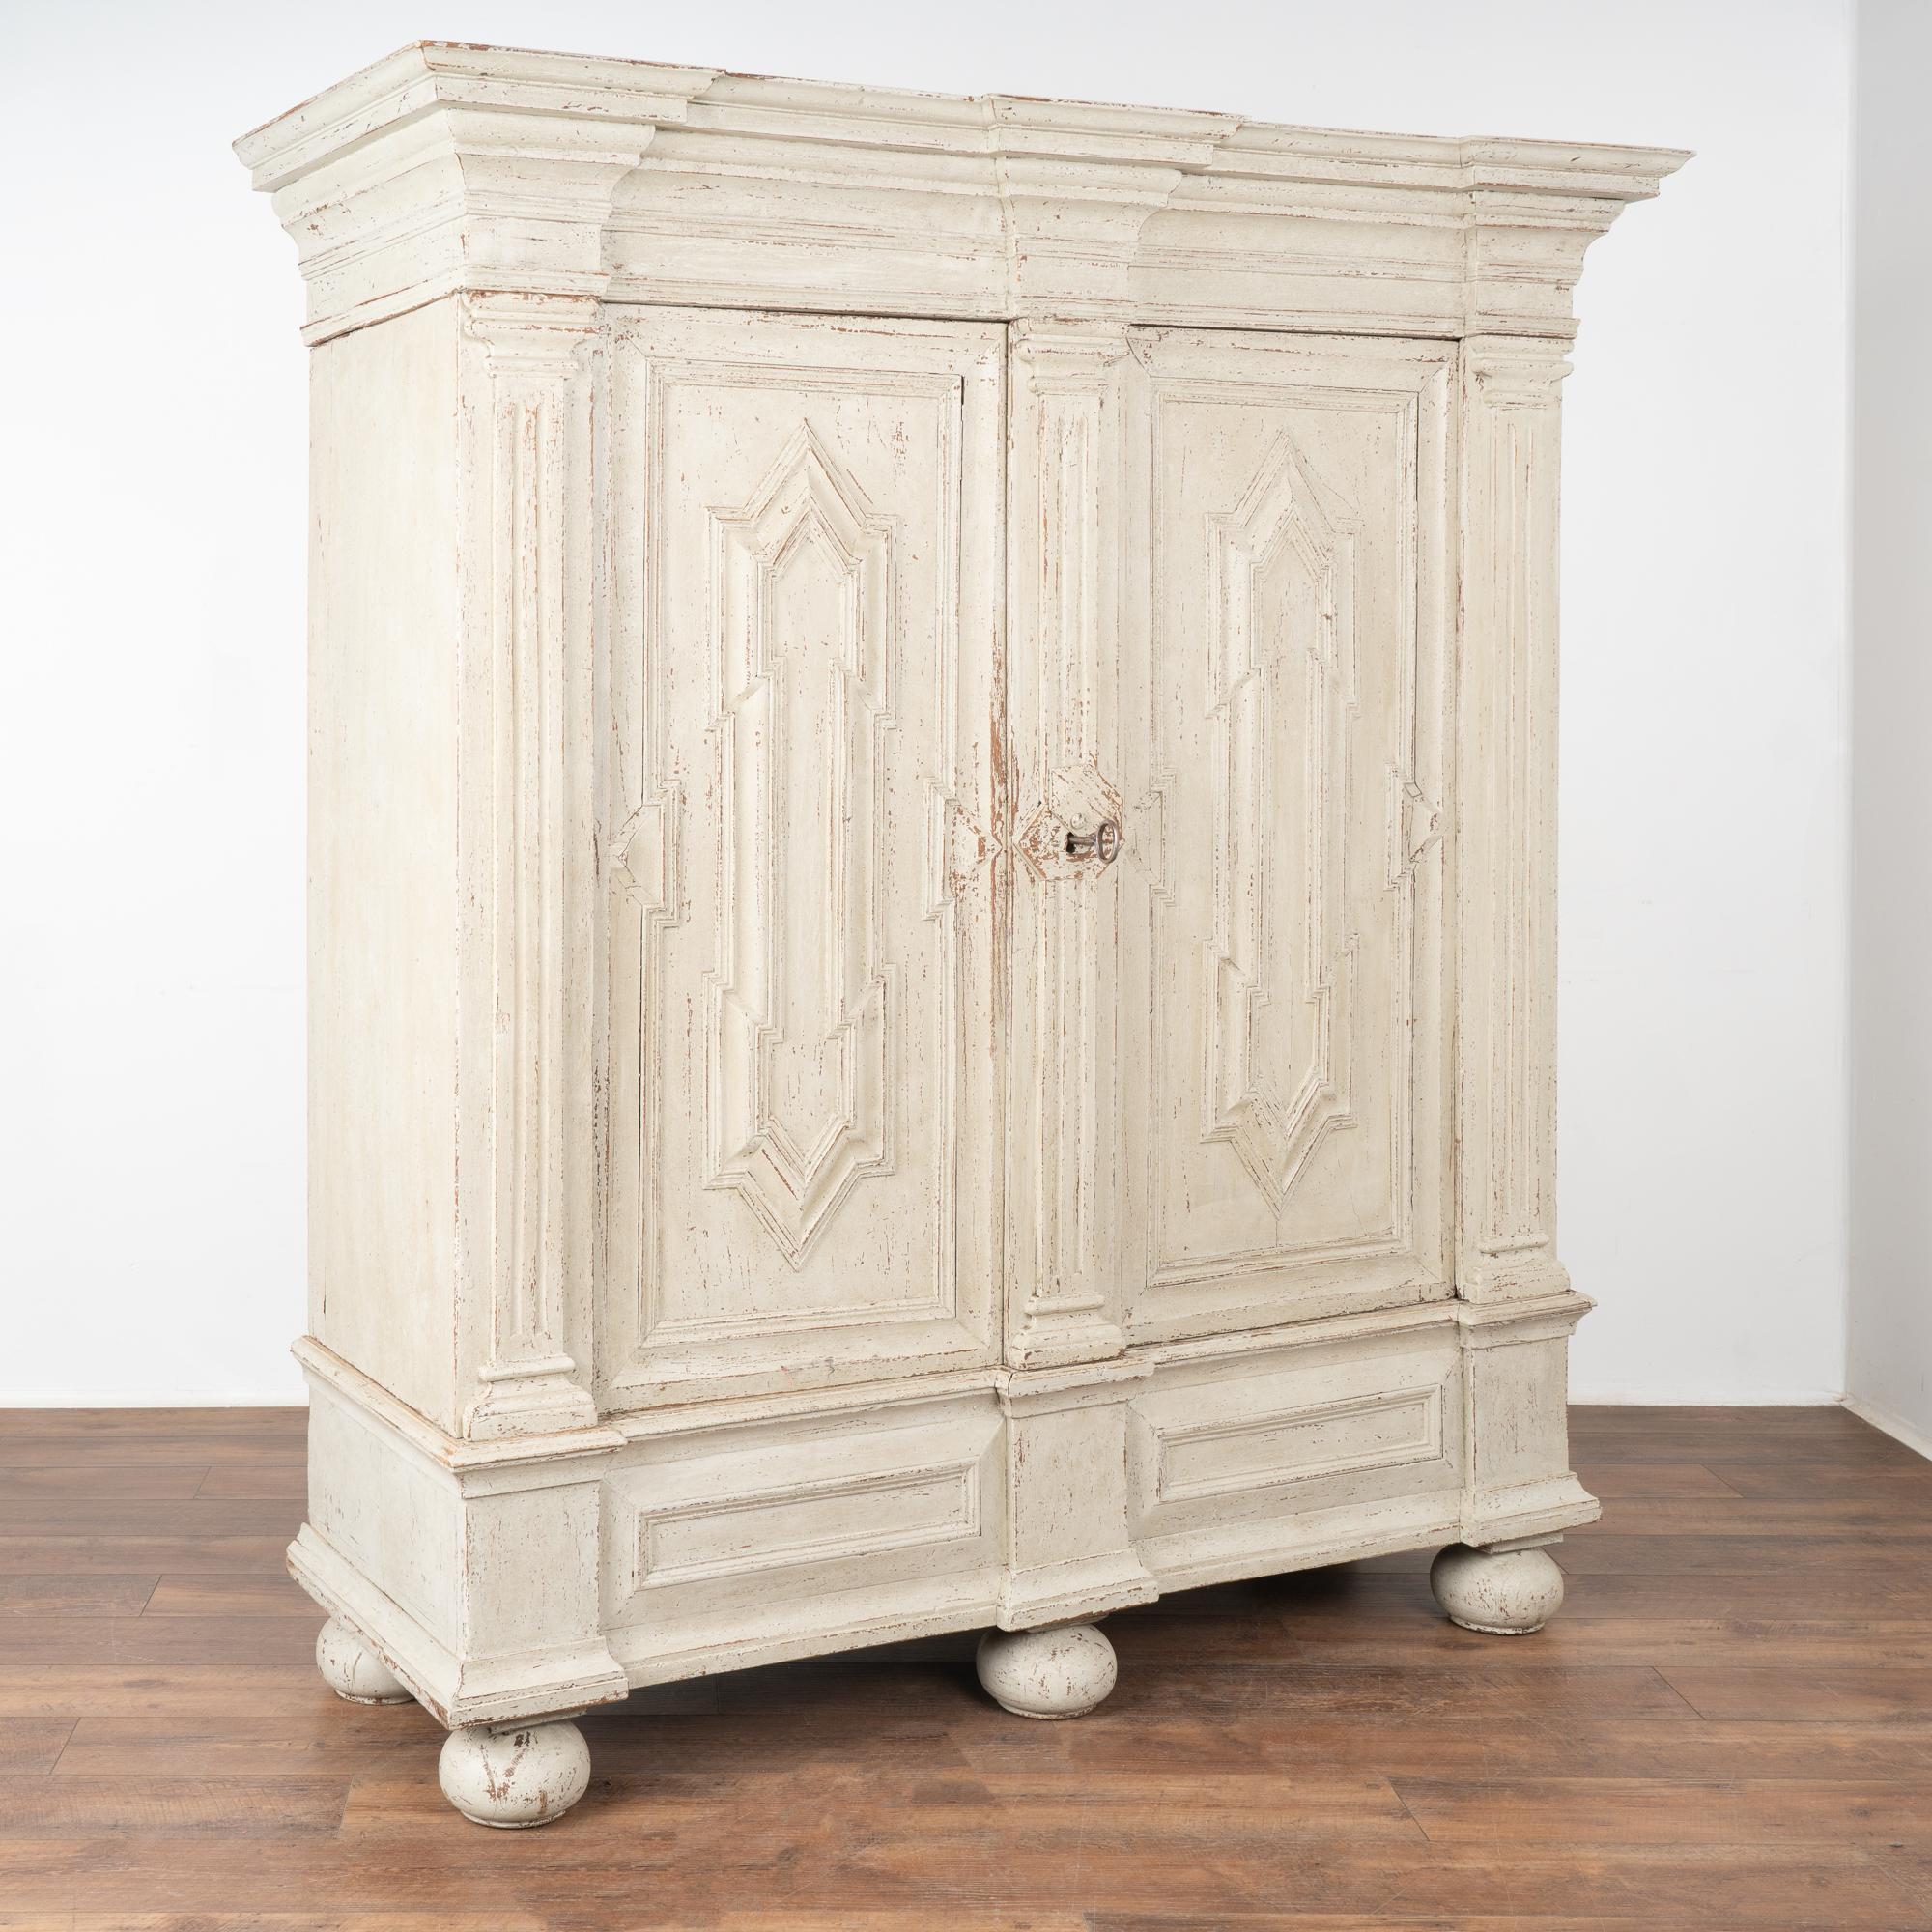 Impressive oak baroque armoire that dates from the late 1700's into early 1800's. Note the heavily paneled doors, massive crown all resting on large bun feet.
Restored, later professionally painted in layered shades of antique white and light gray;